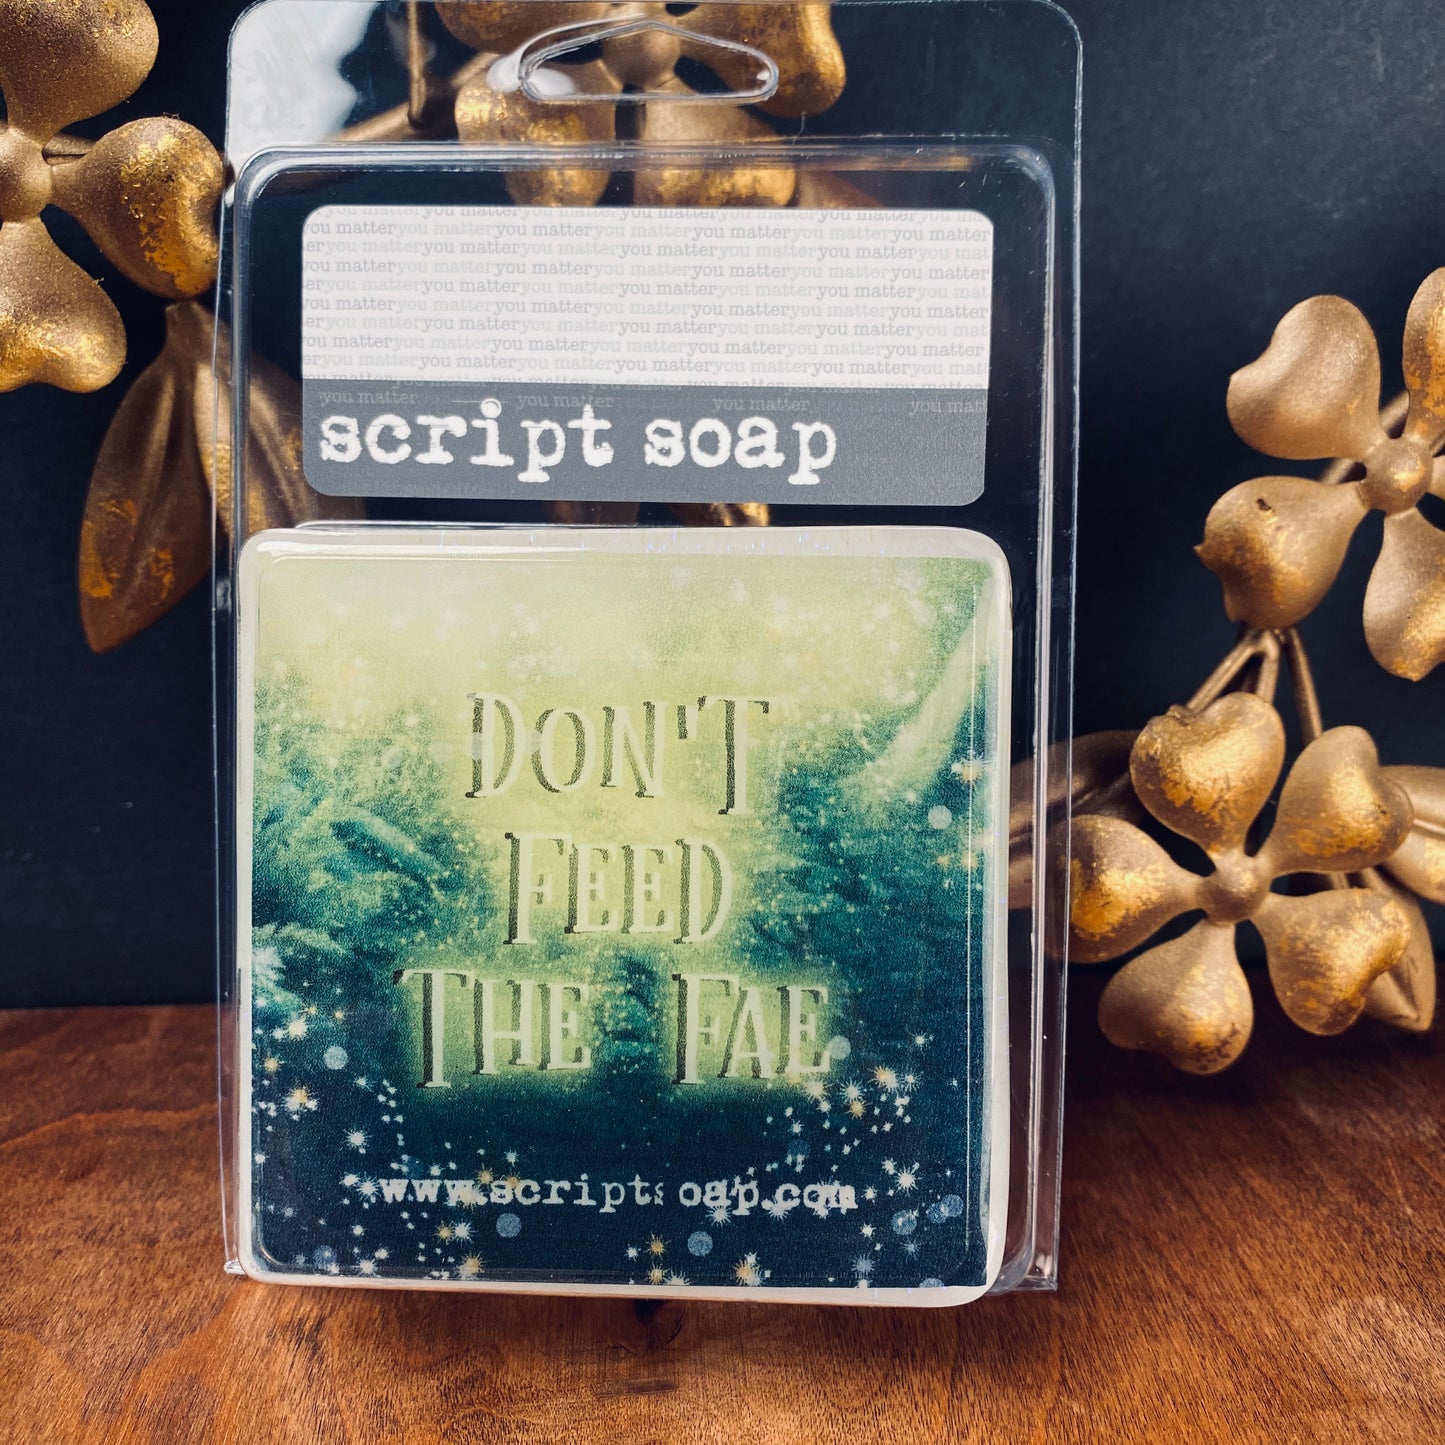 DON'T FEED THE FAE Script Soap